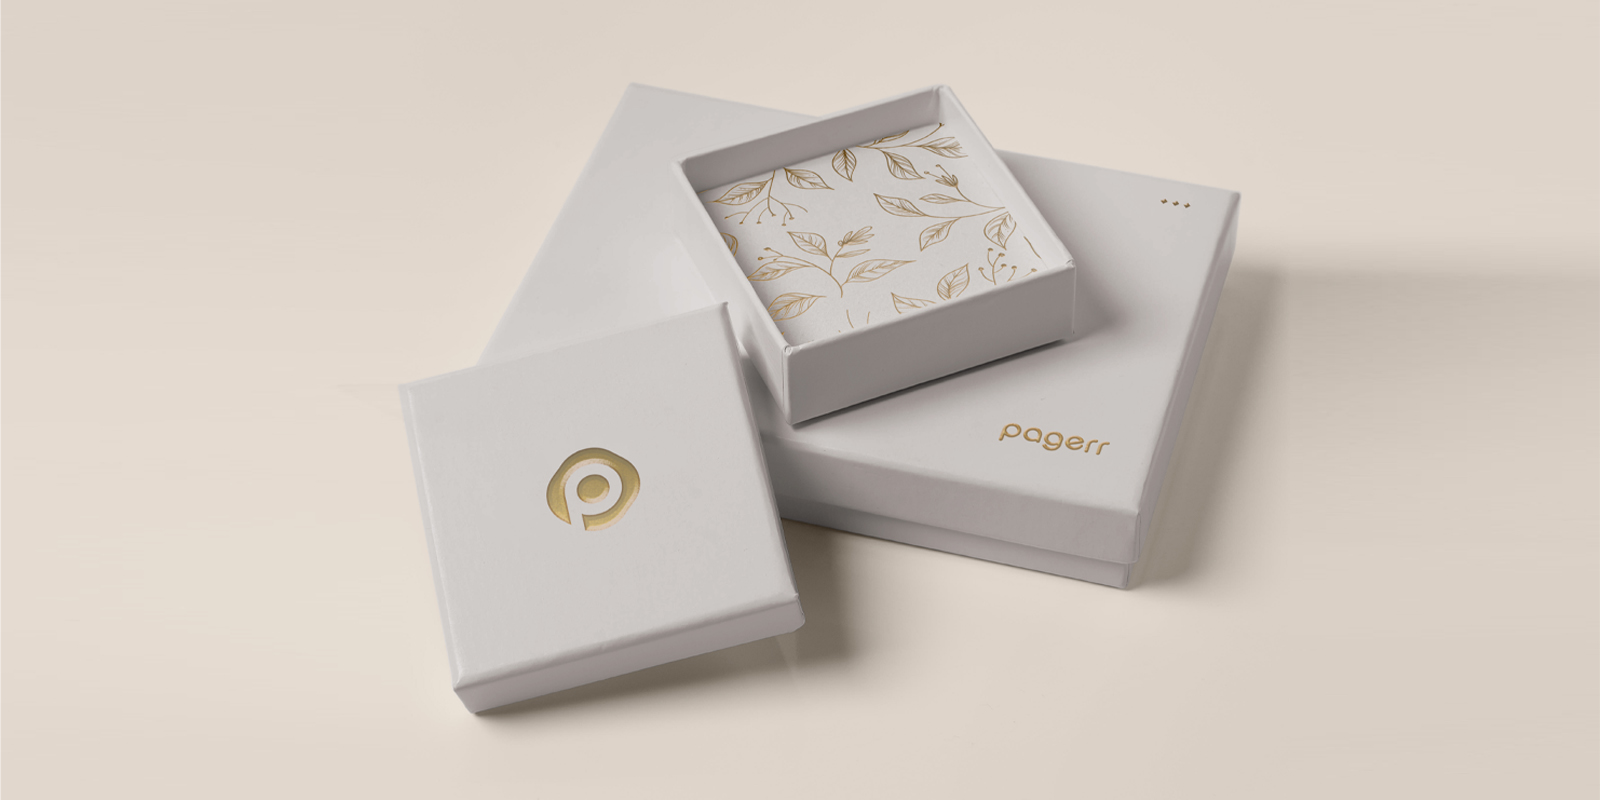 Product boxes in Vilnius - Print with Pagerr